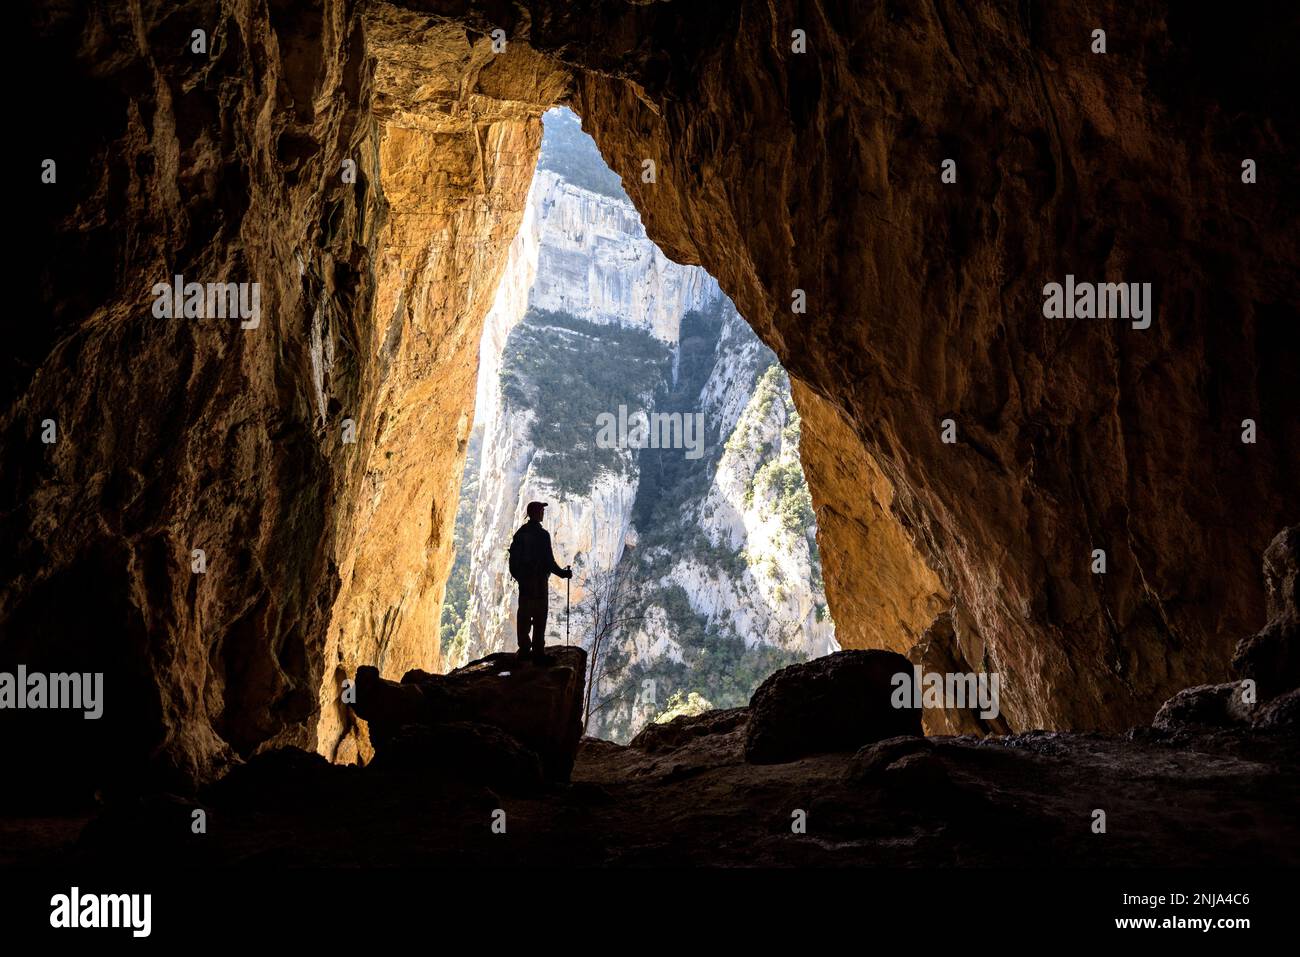 https://c8.alamy.com/comp/2NJA4C6/colomera-cave-located-in-the-middle-of-the-mont-rebei-gorge-in-the-montsec-mountain-range-pallars-juss-lleida-catalonia-spain-pyrenees-2NJA4C6.jpg